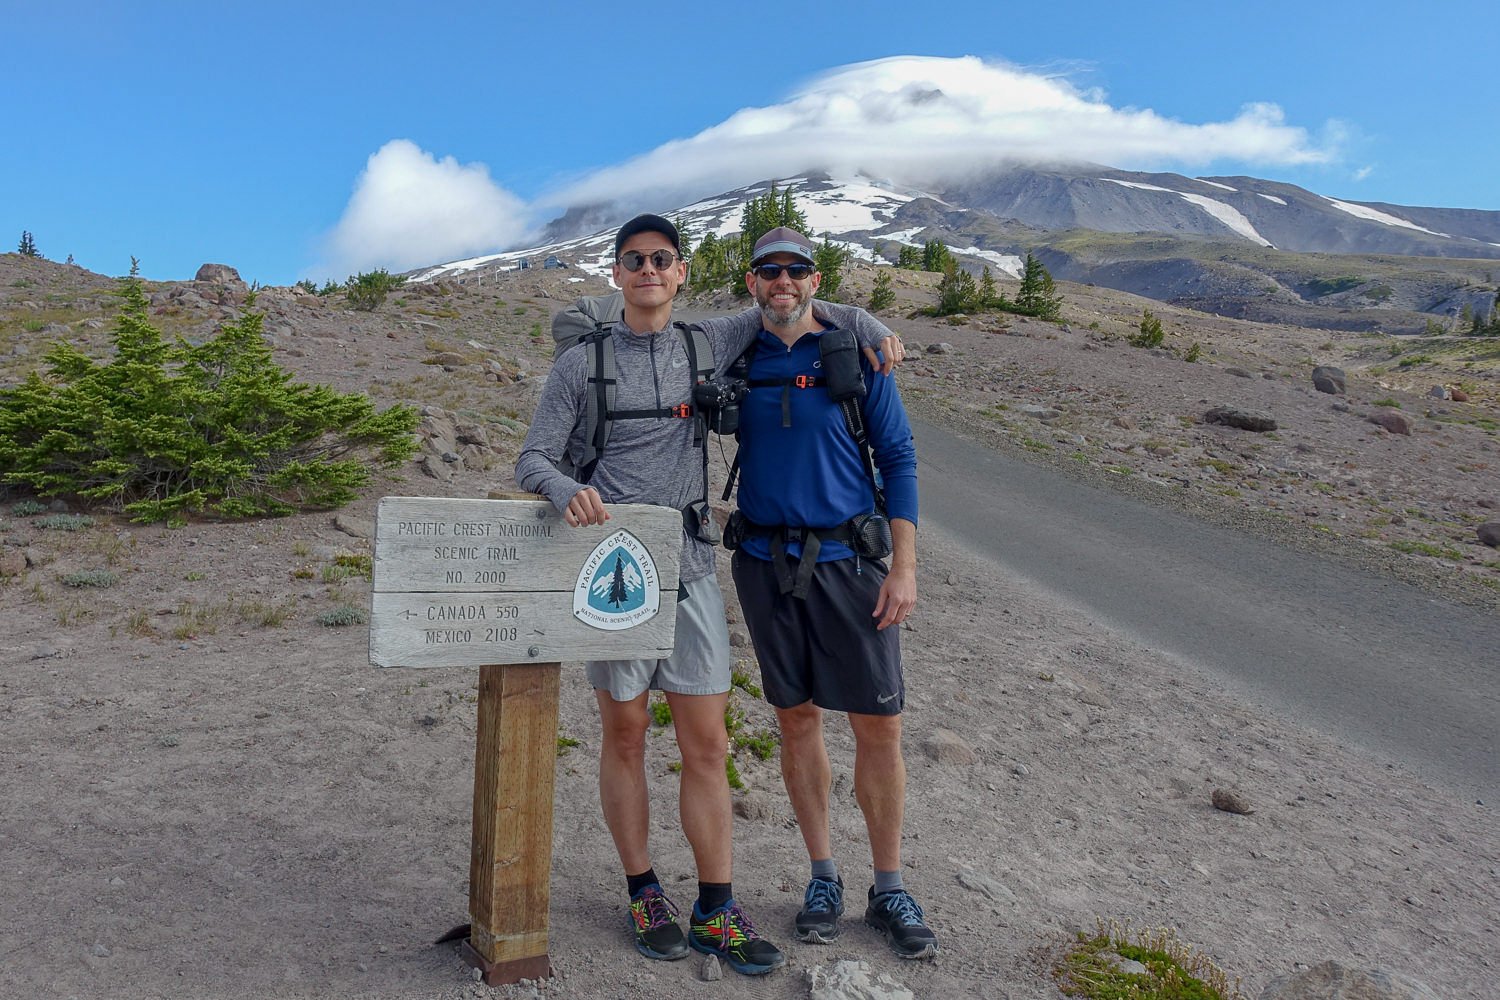 Two backpackers posing at the start of their trek on the Timberline Trail.